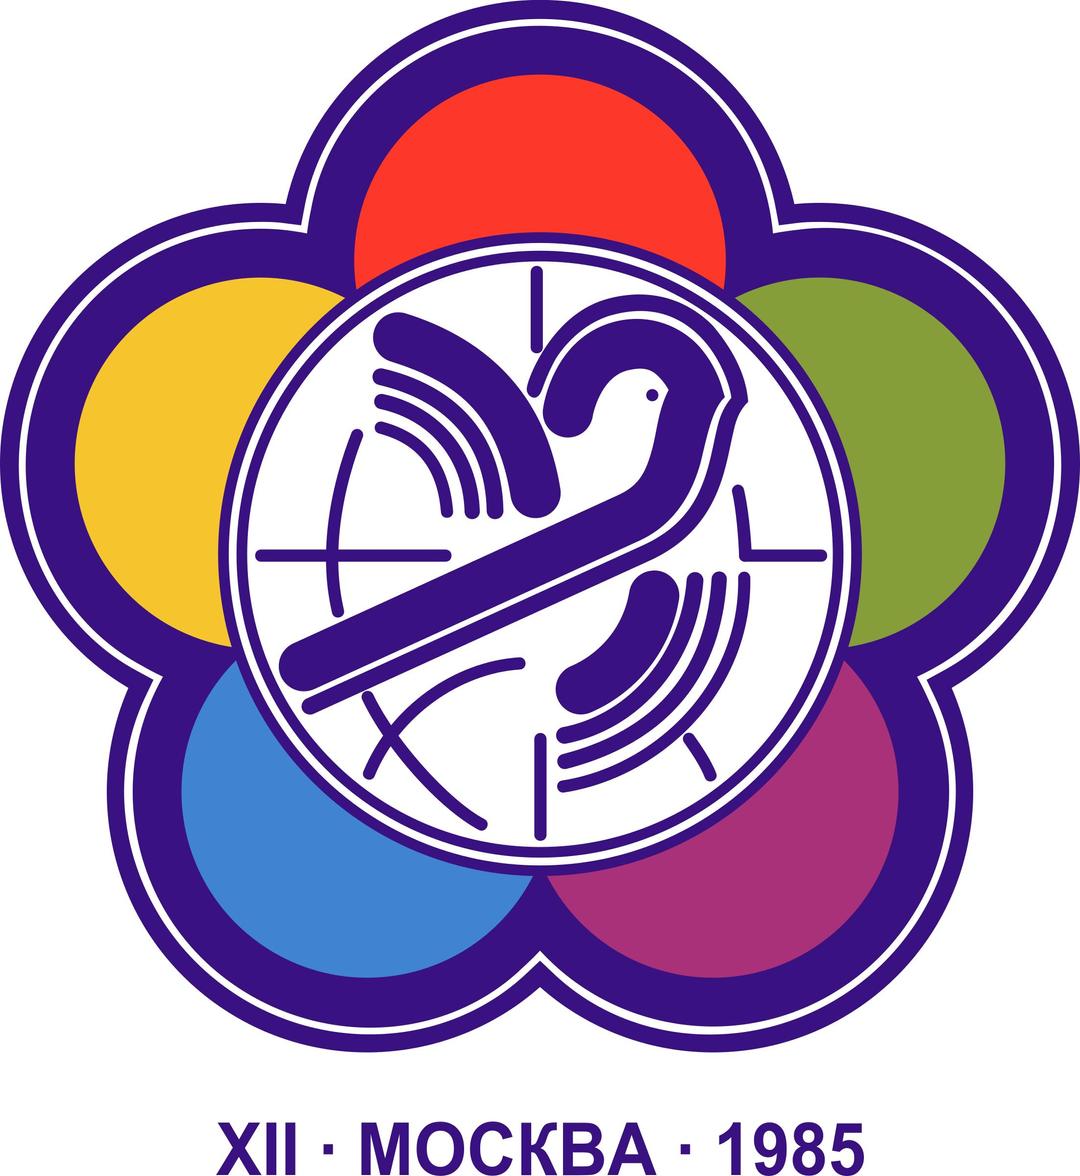 XII World Festival of Youth and Students emblem png transparent